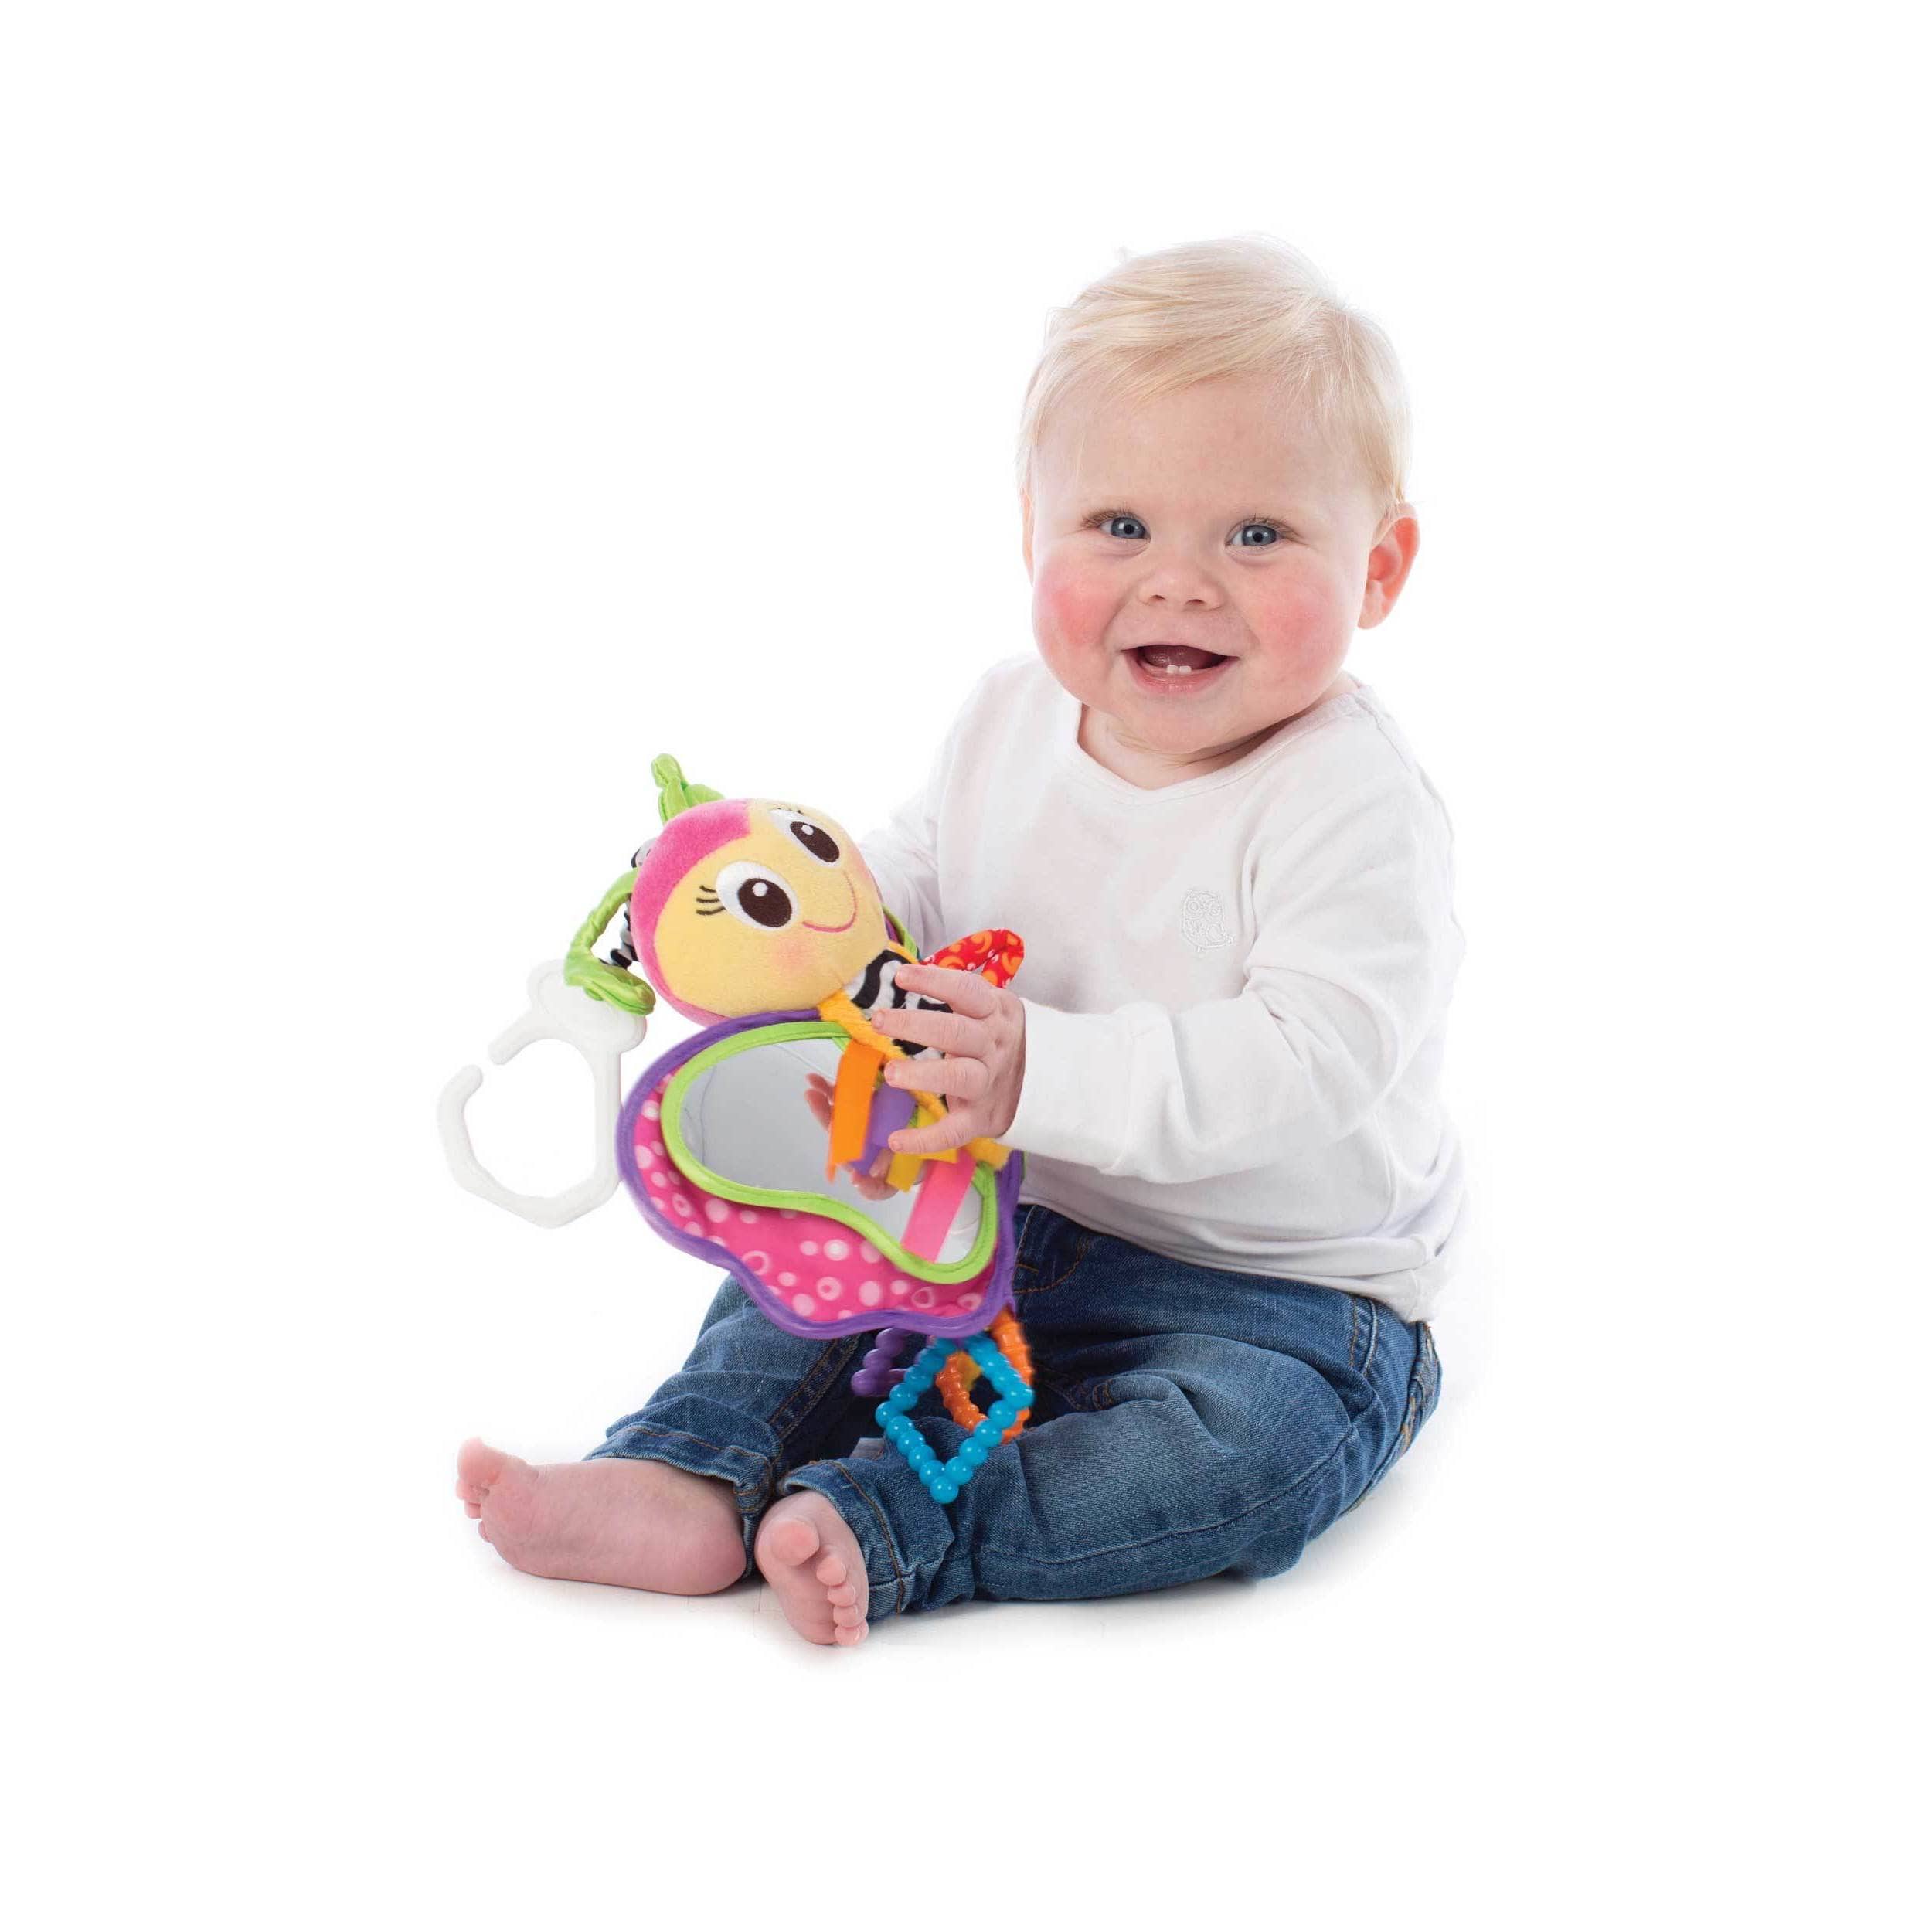 Playgro Blossom Butterfly Activity Friend - image 3 of 6